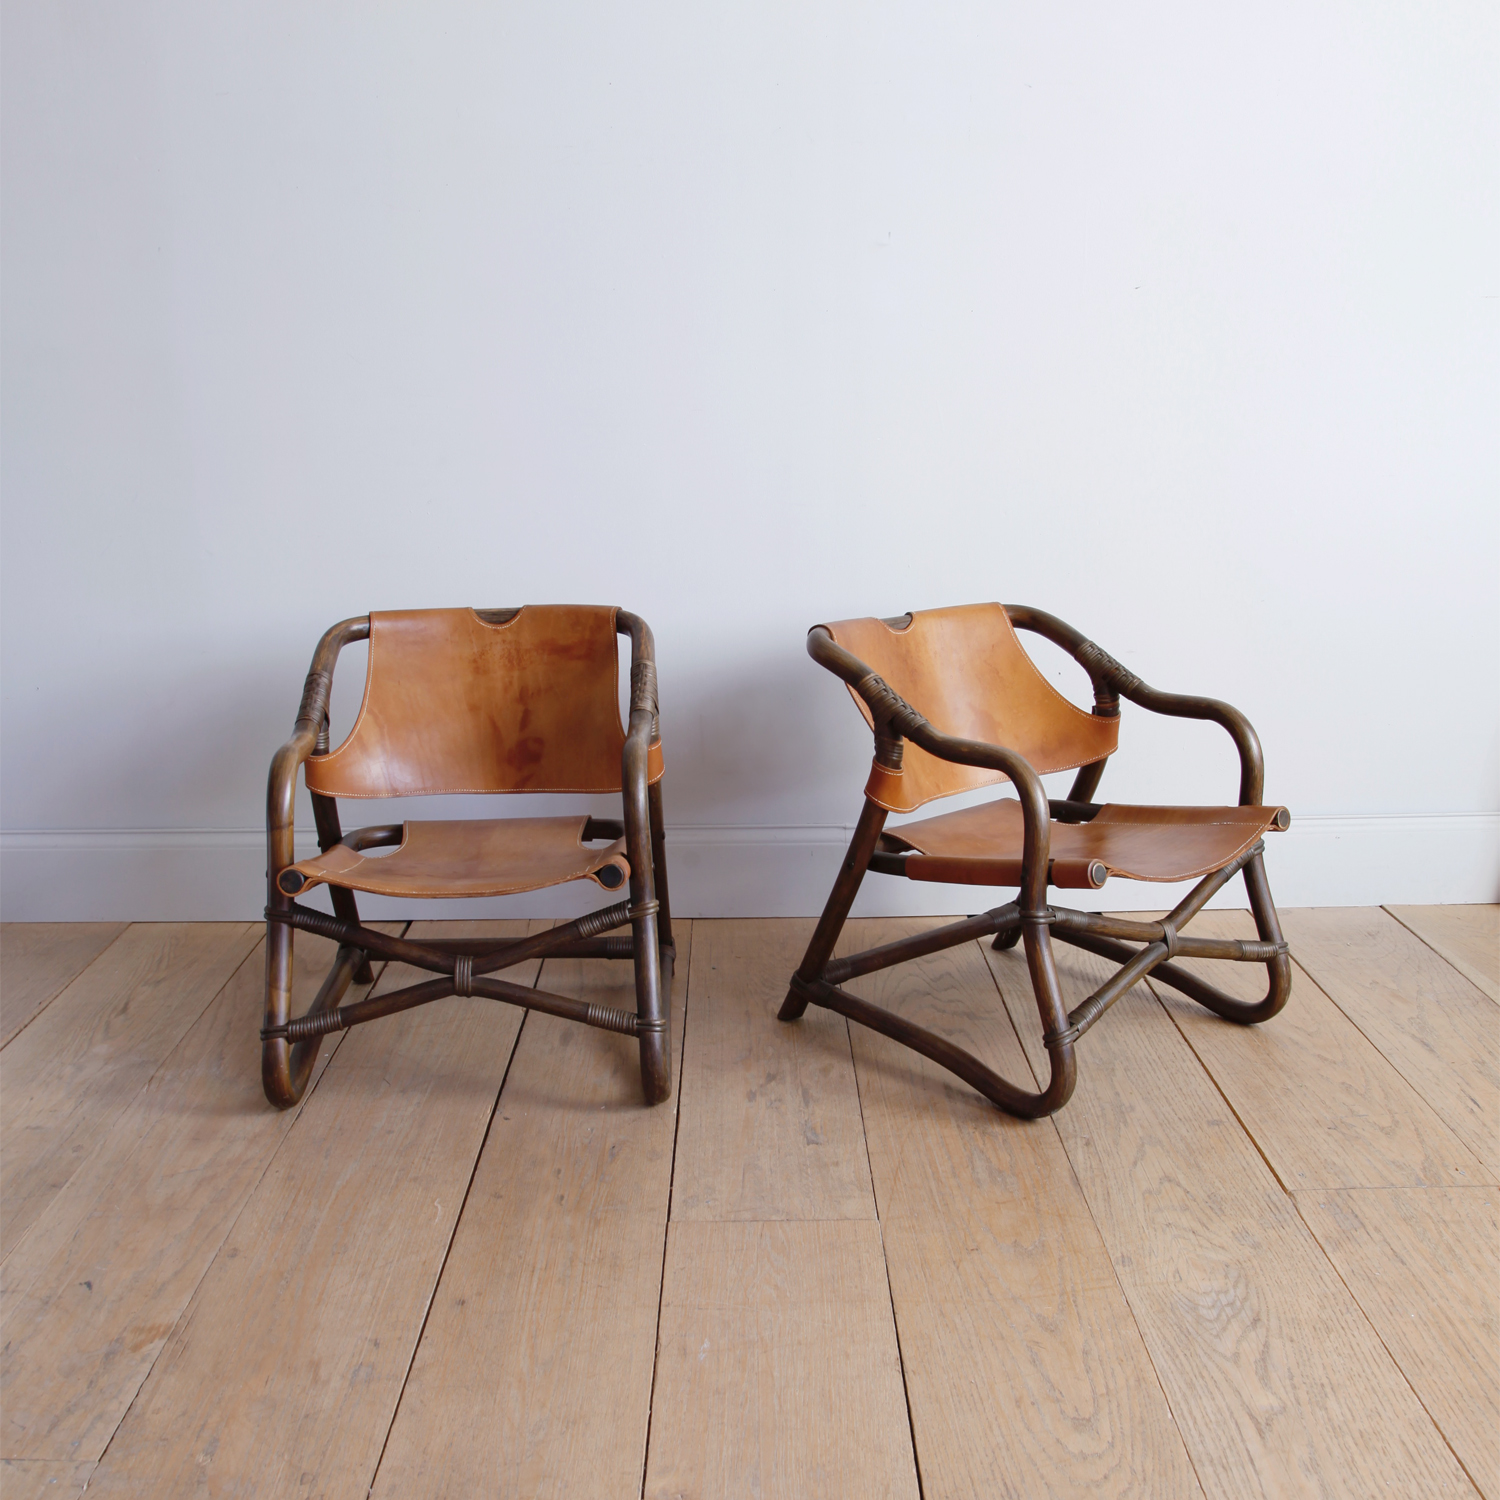 Pair of Bent Bamboo and Leather Lounge Chairs